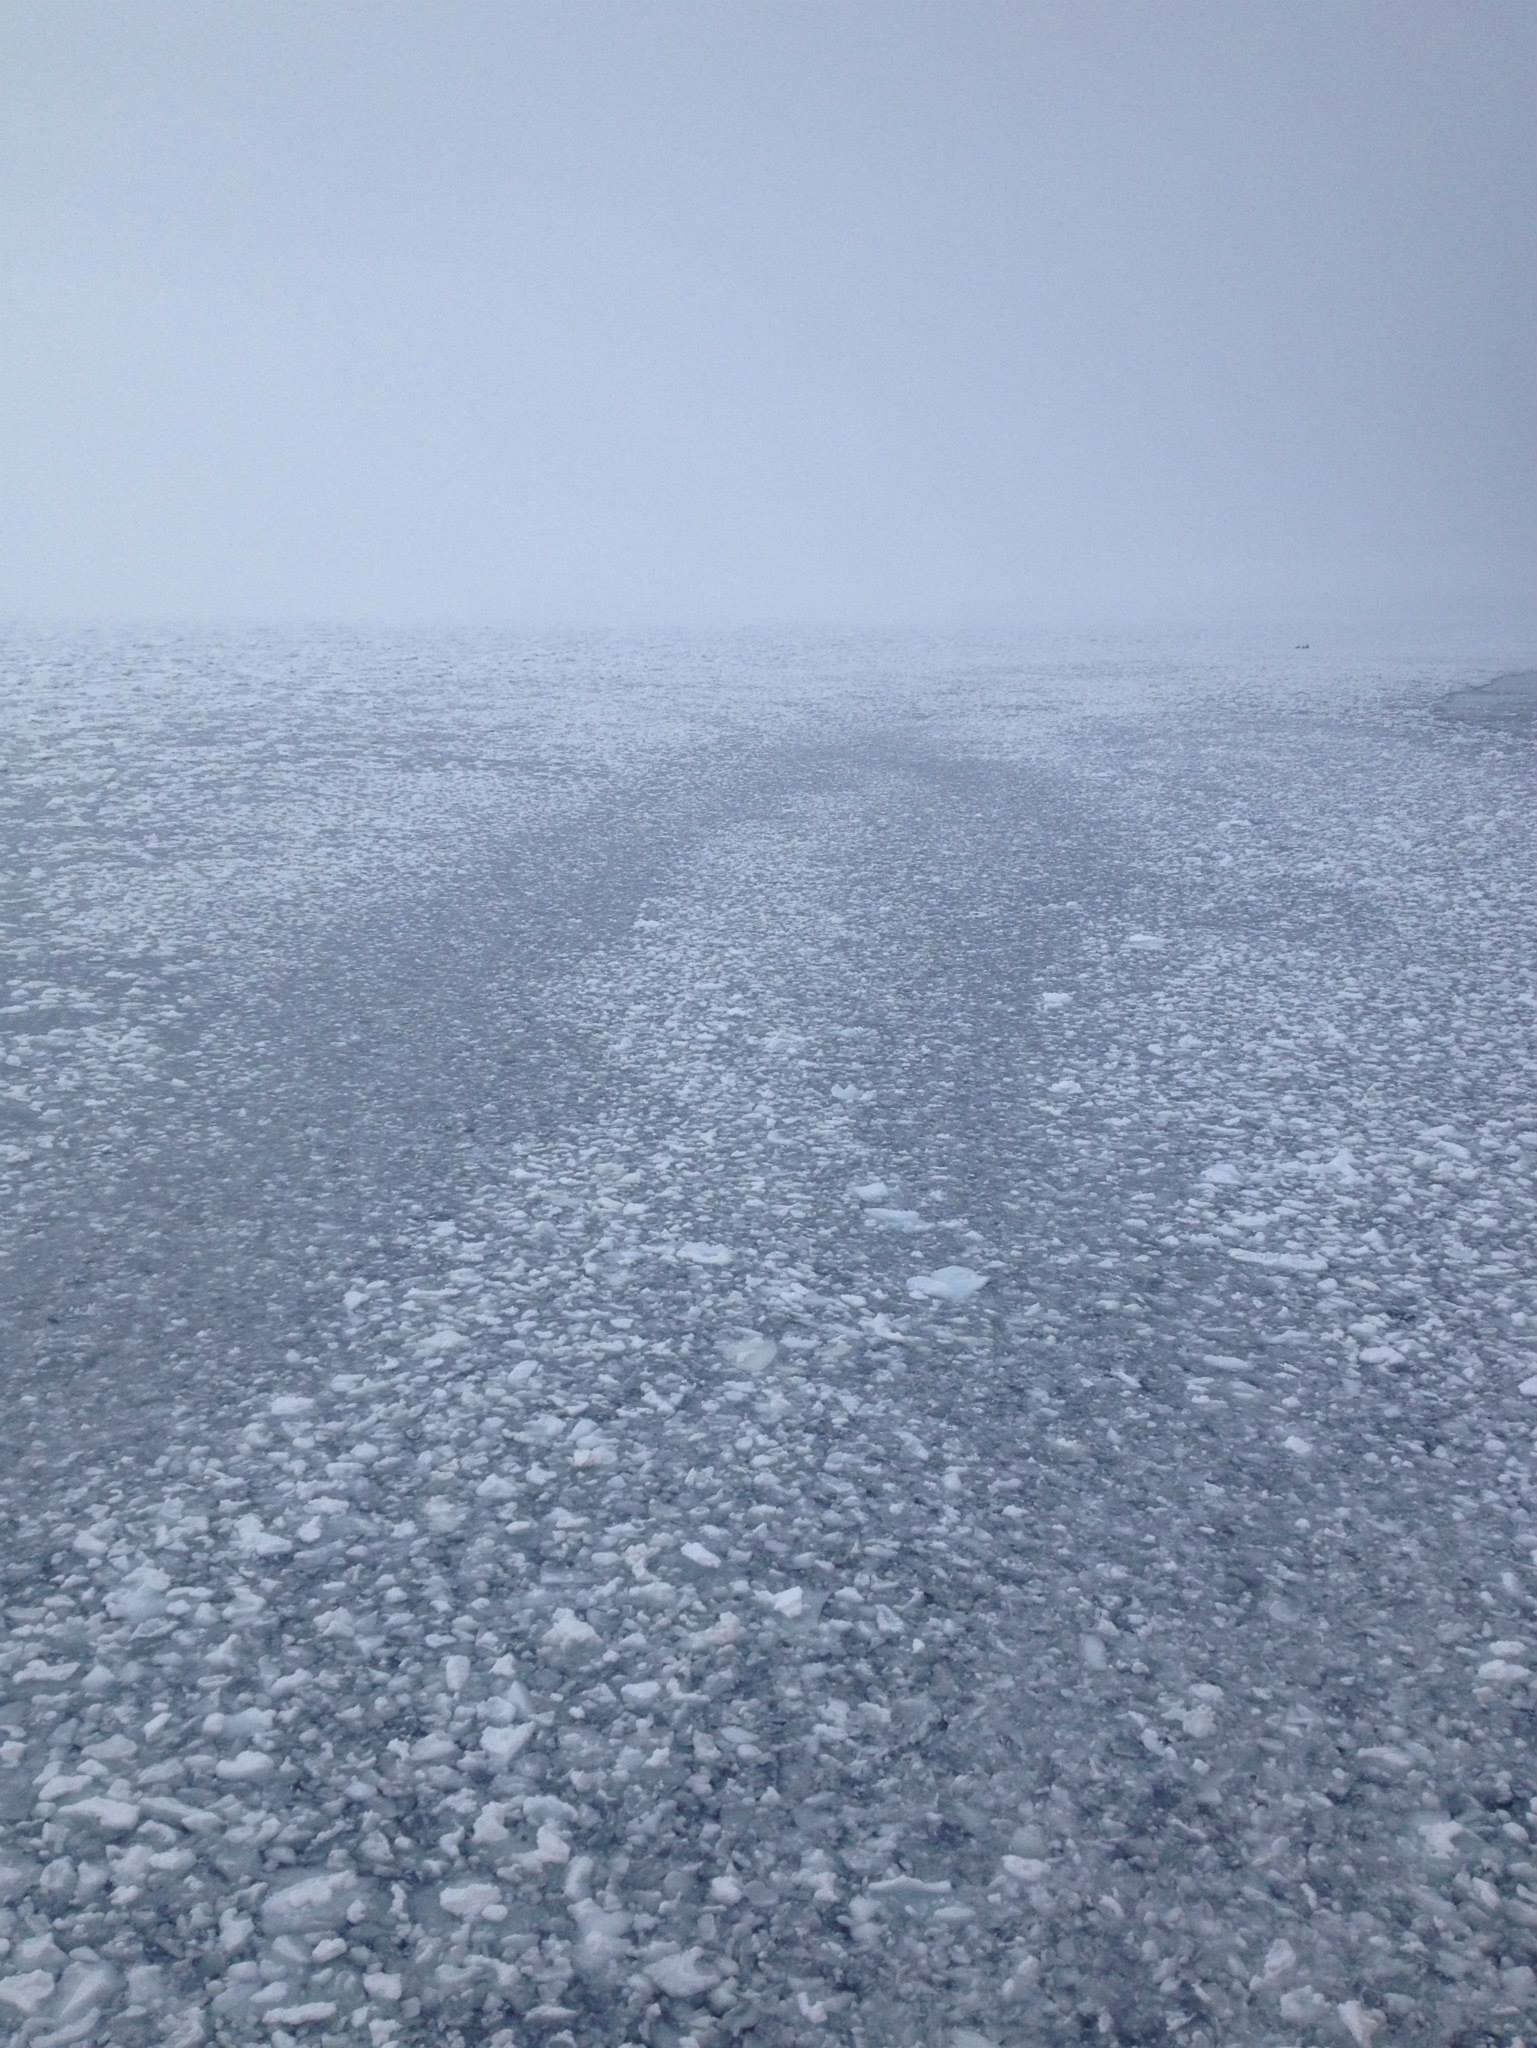 A photograph taken off the back of a boat looking at the sea. The water’s surface is filled with fragments of broken ice pieces. The icy water looks “crunchy” and fades into the horizon. The sky is one tone of gray and nearly blends in with the icy water.